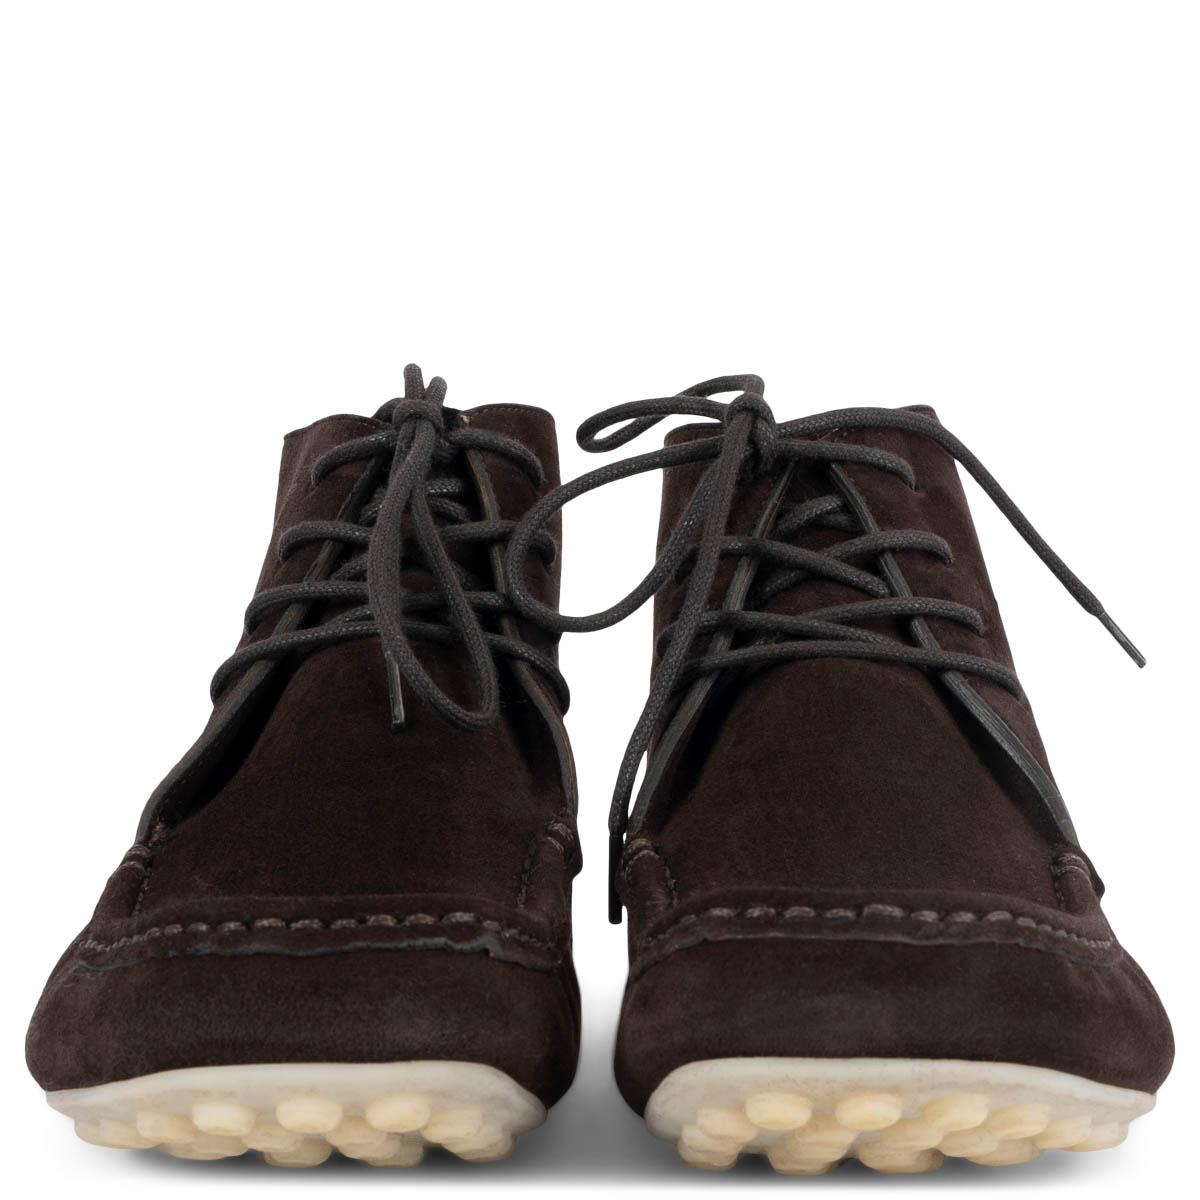 100% authentic Loro Piana Dot sole lace-up ankle boots in chocolate brown suede with an off-white rubber sole. Have been worn and show soft wear to the front. 

Measurements
Model	FAN3946
Imprinted Size	37.5
Shoe Size	37.5
Inside Sole	24.5cm